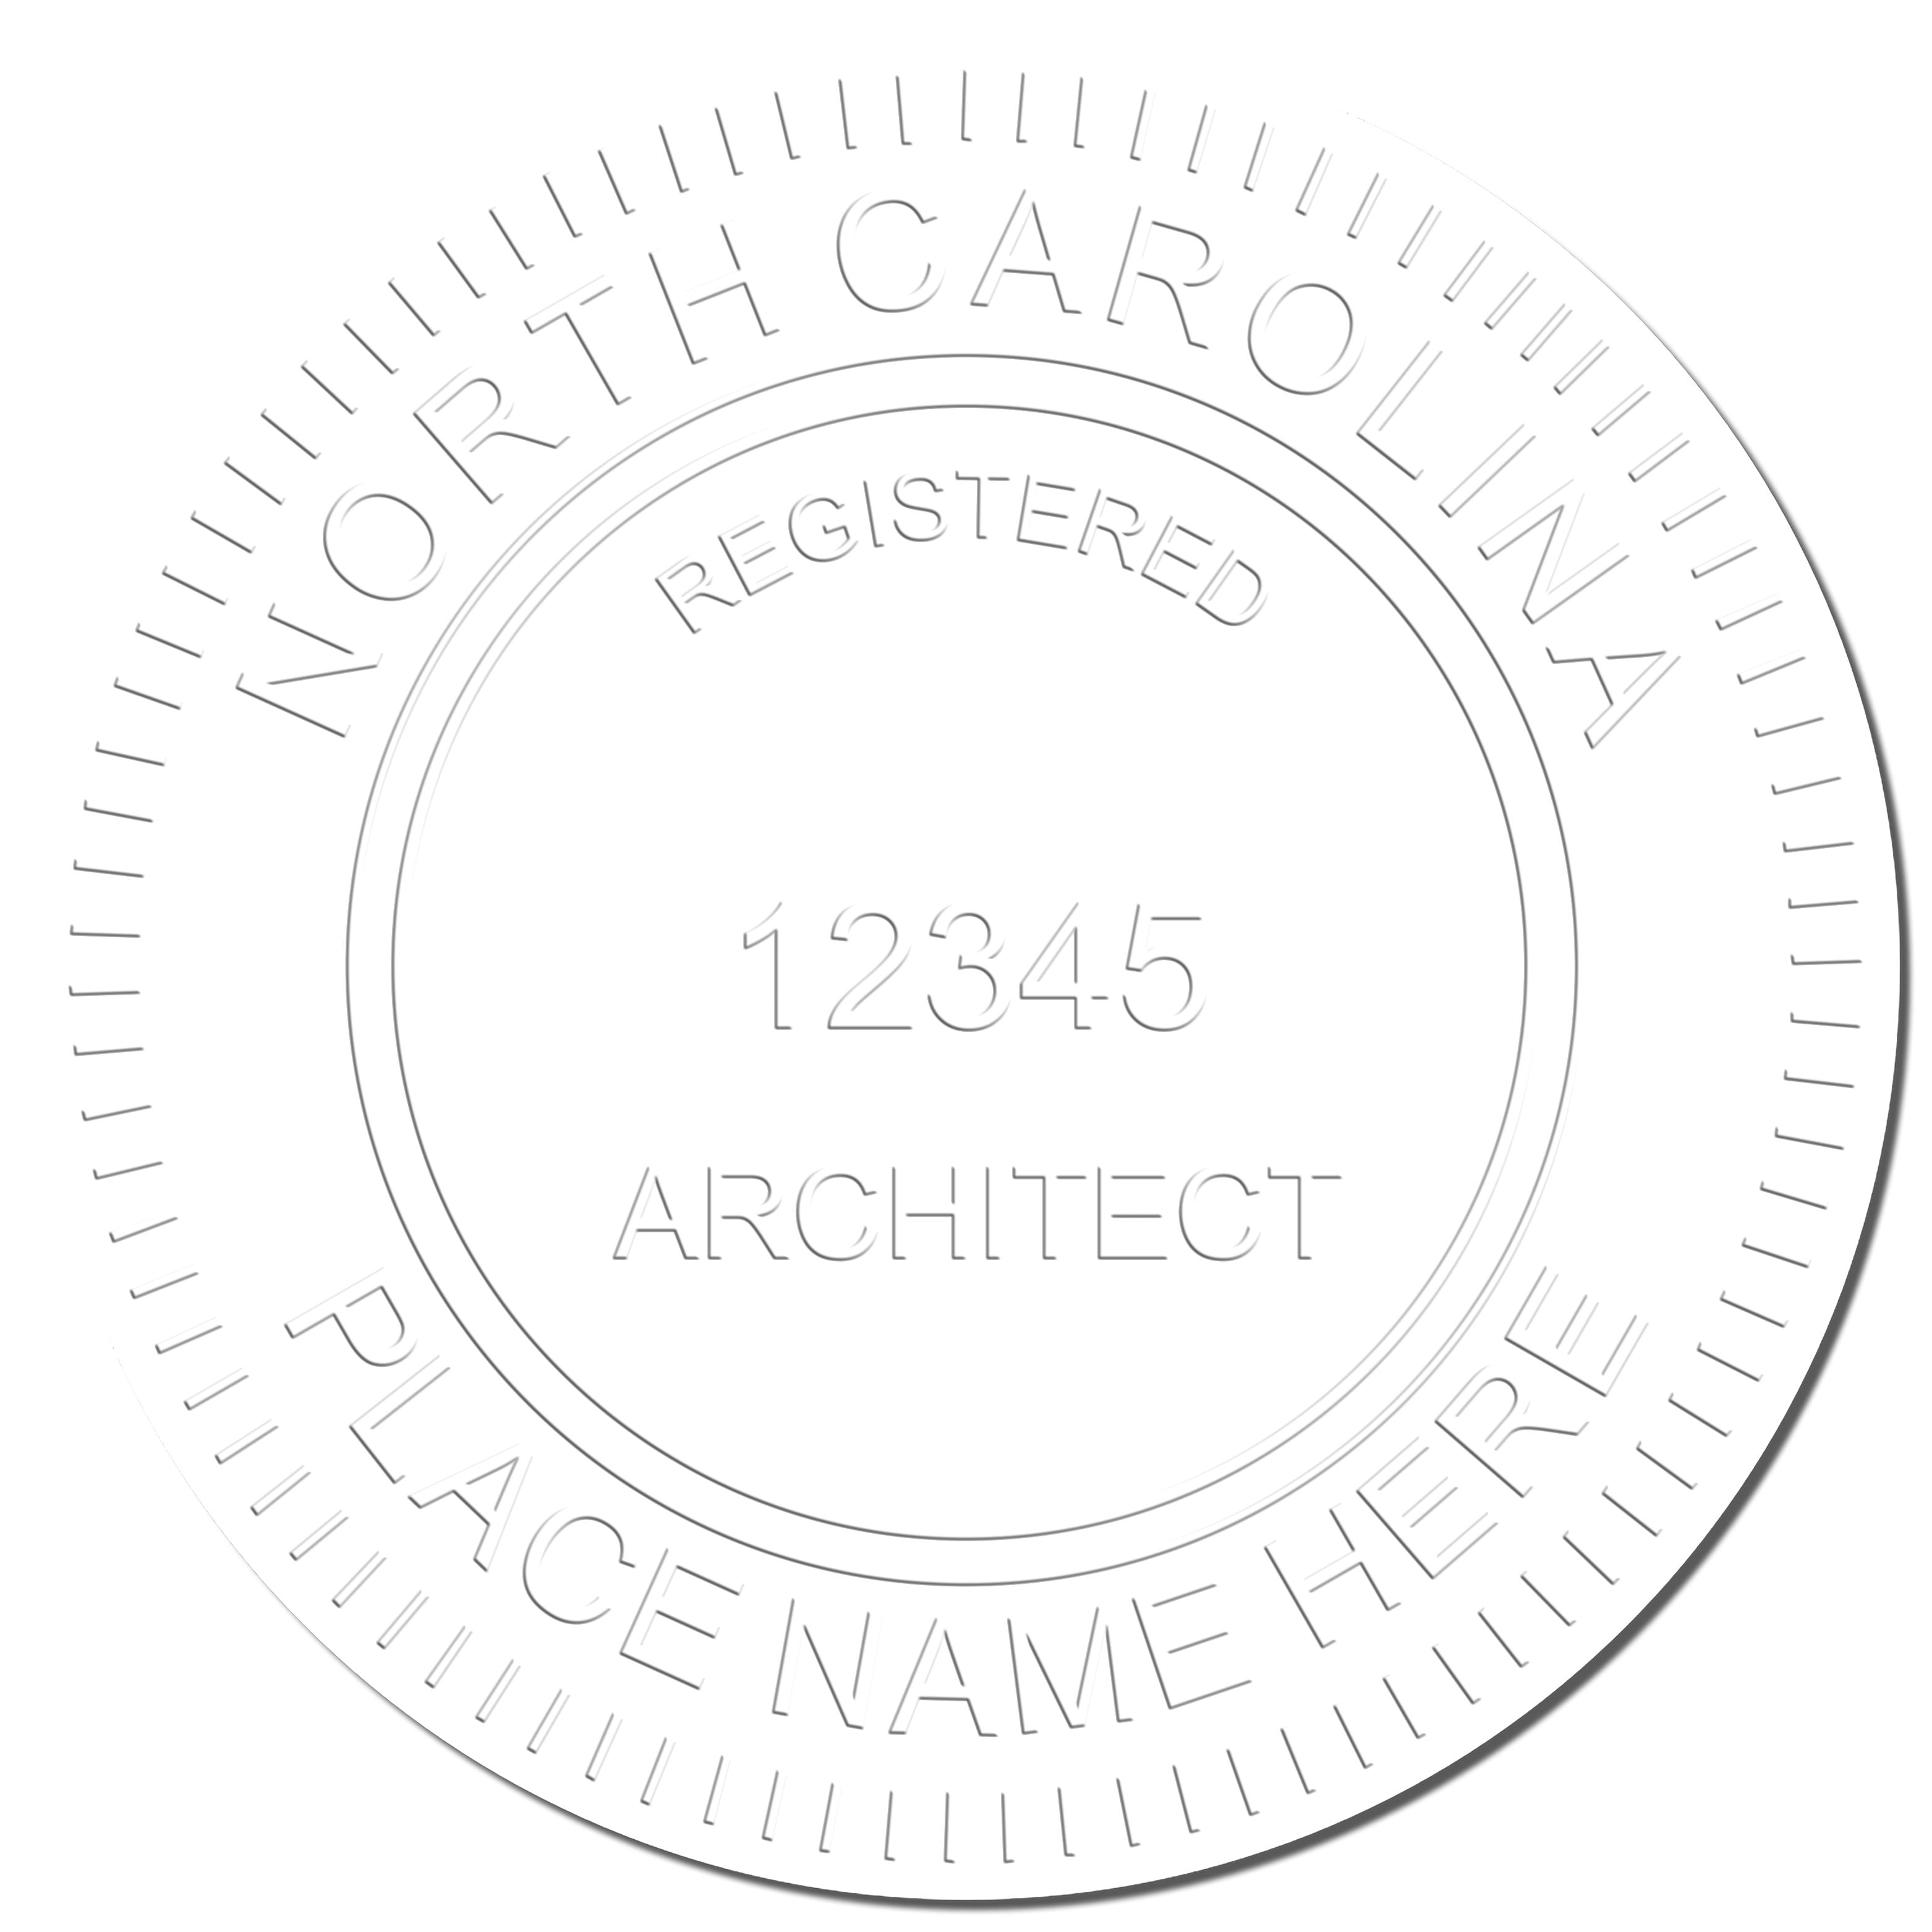 This paper is stamped with a sample imprint of the Gift North Carolina Architect Seal, signifying its quality and reliability.